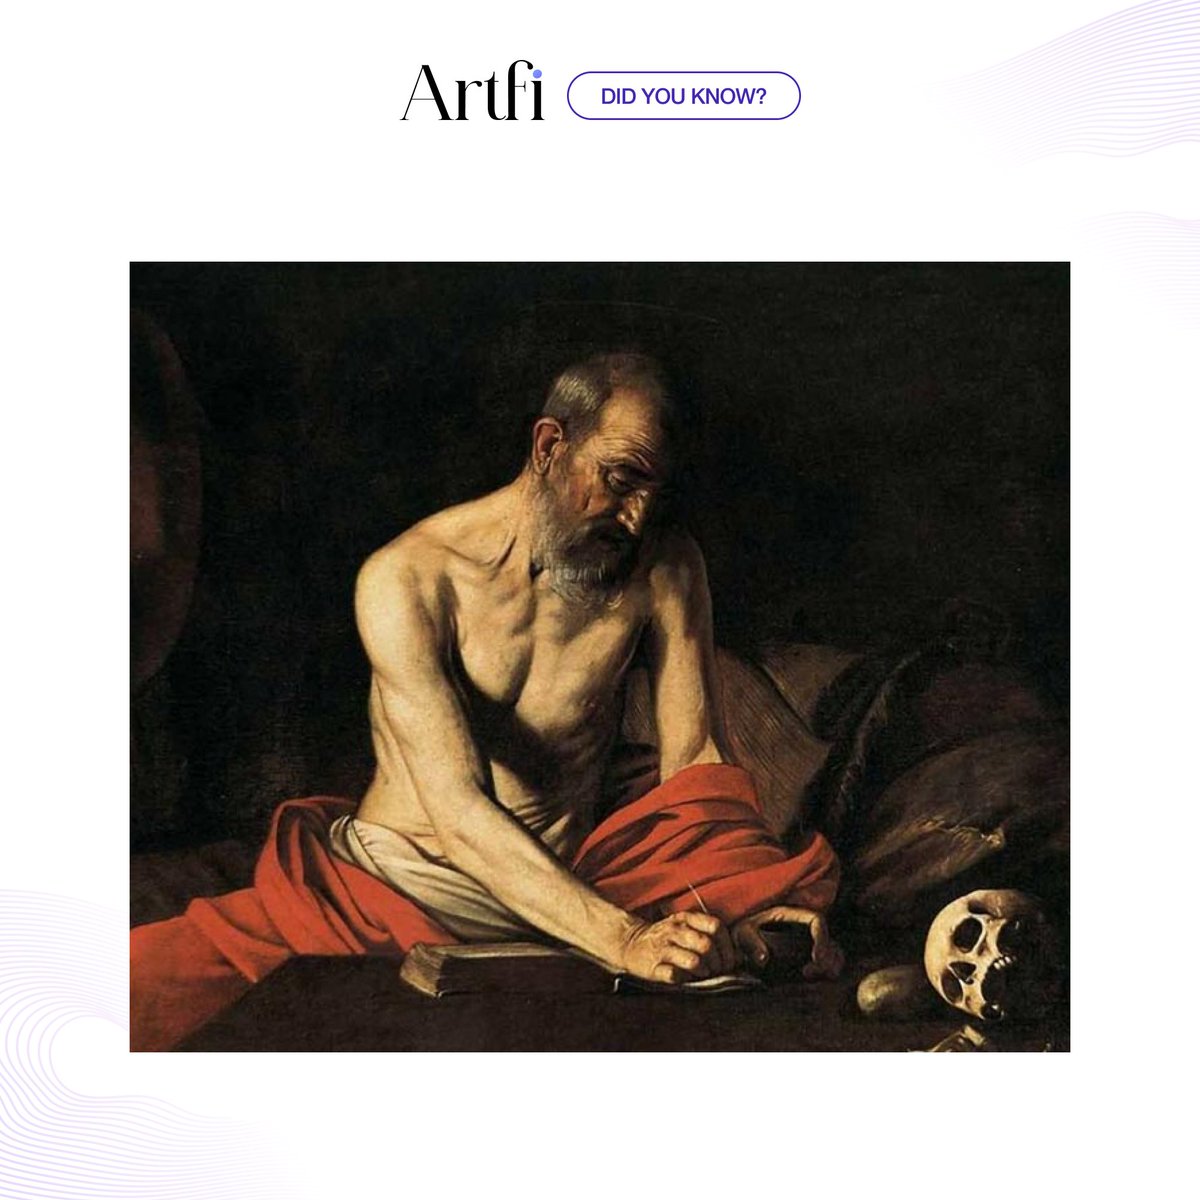 Did you know the term 'chiaroscuro' refers to the use of strong contrasts between light and dark in art, often used to create a sense of volume and three-dimensionality? Learn more about this: drawpaintacademy.com/chiaroscuro/